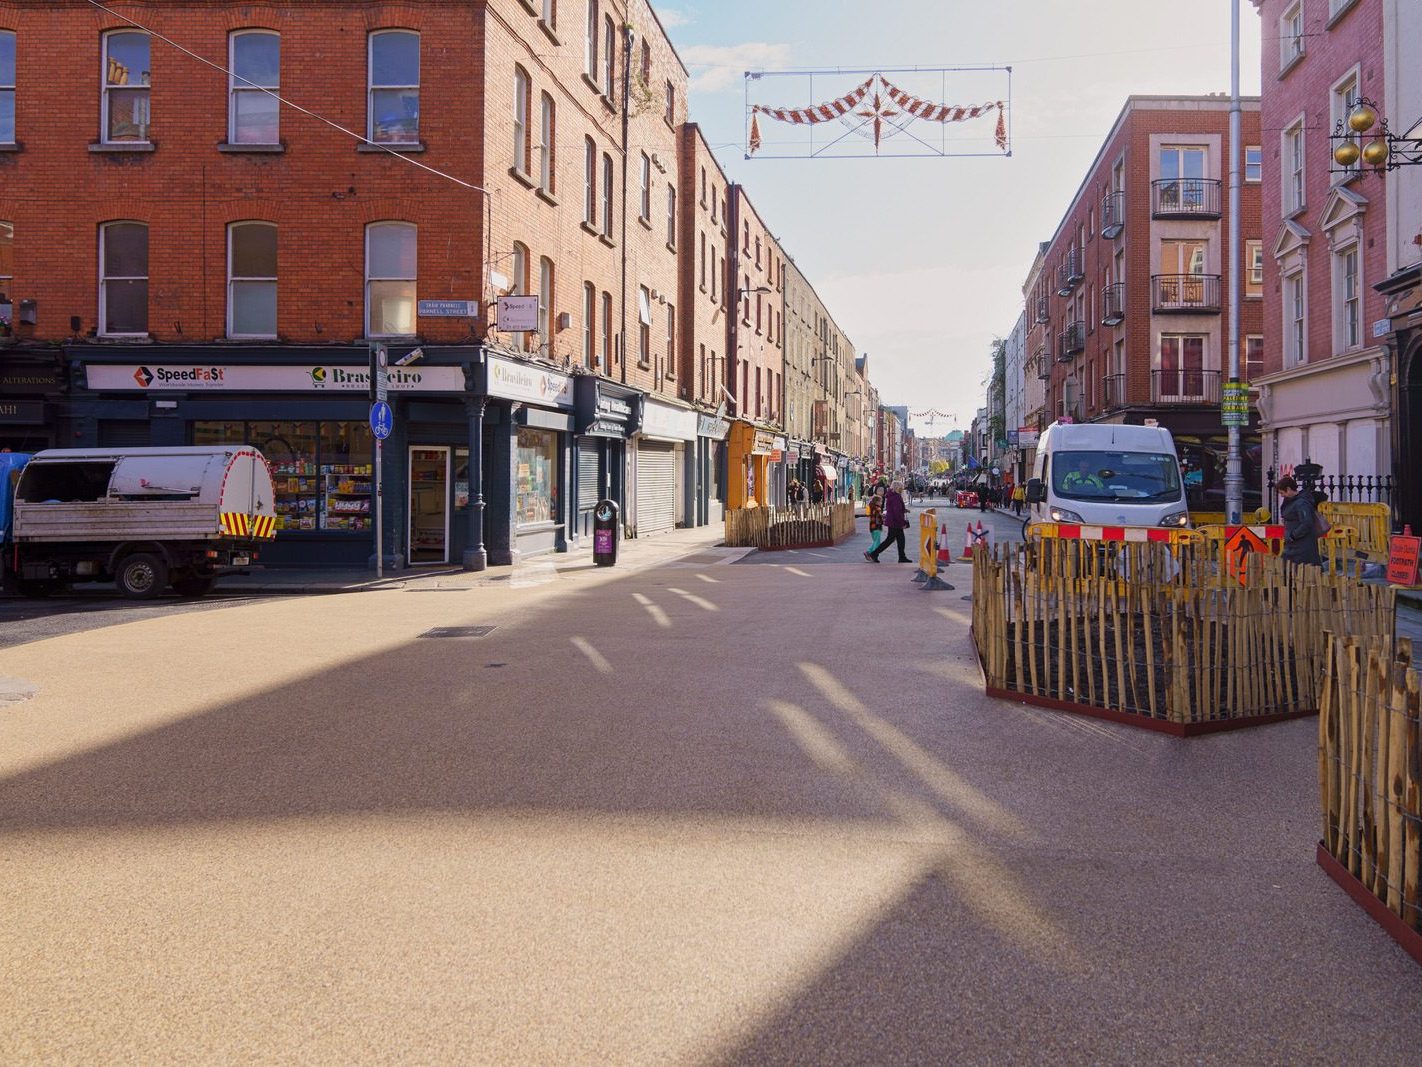 CAPEL STREET IS STILL A W.I.P. [THE PERIOD BETWEEN HALLOWEEN AND CHRISTMAS]-224783-1